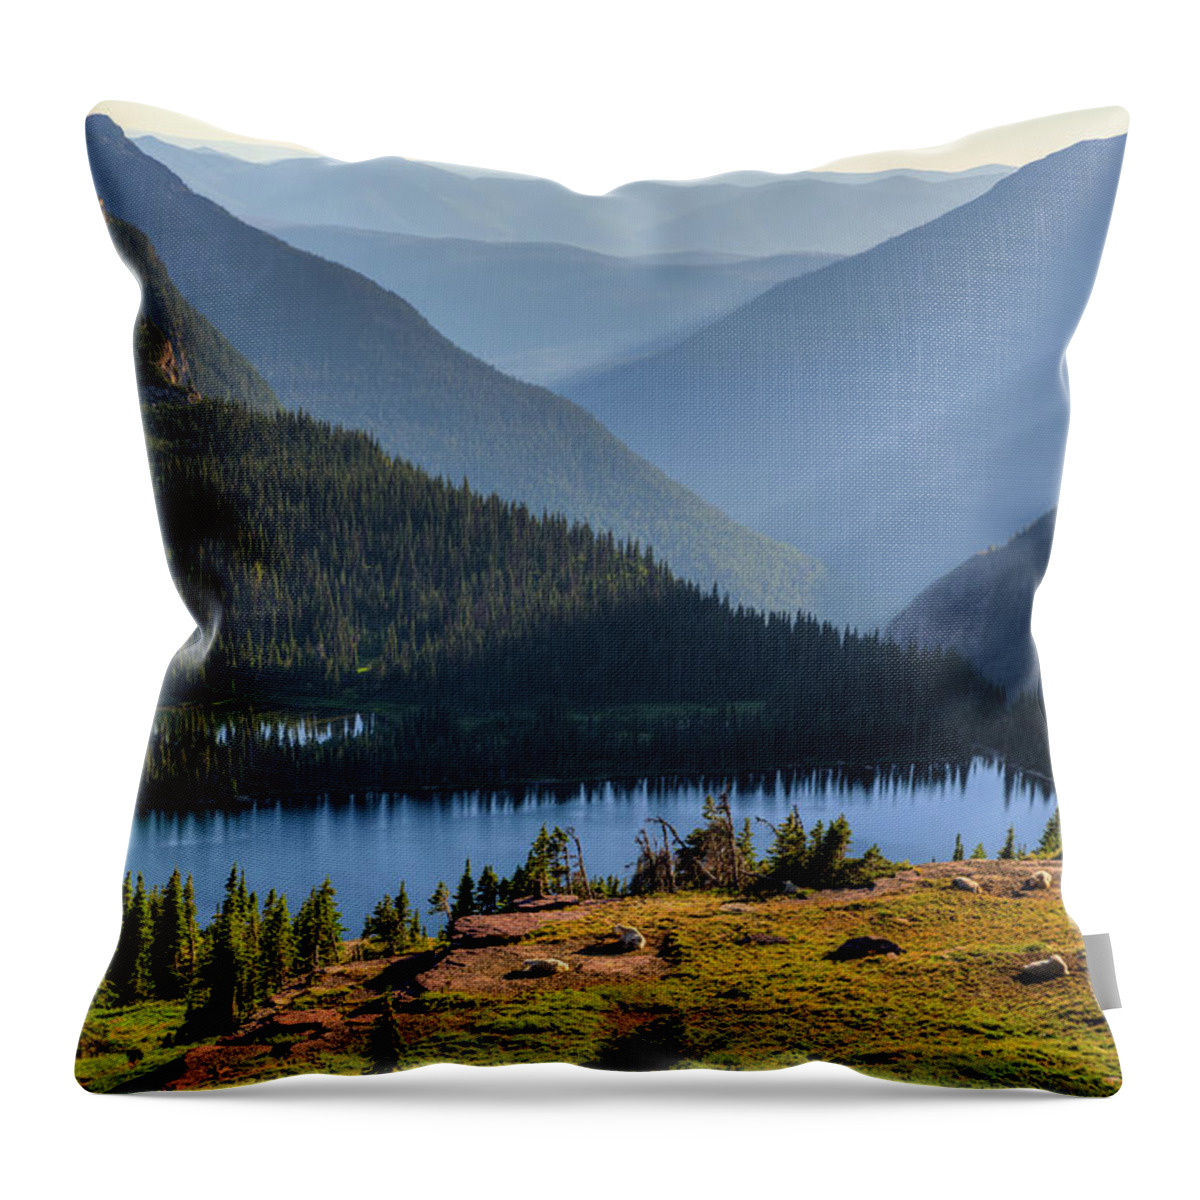 Tranquility Throw Pillow featuring the photograph Mountain Goats Resting by Jeff Krause Photography